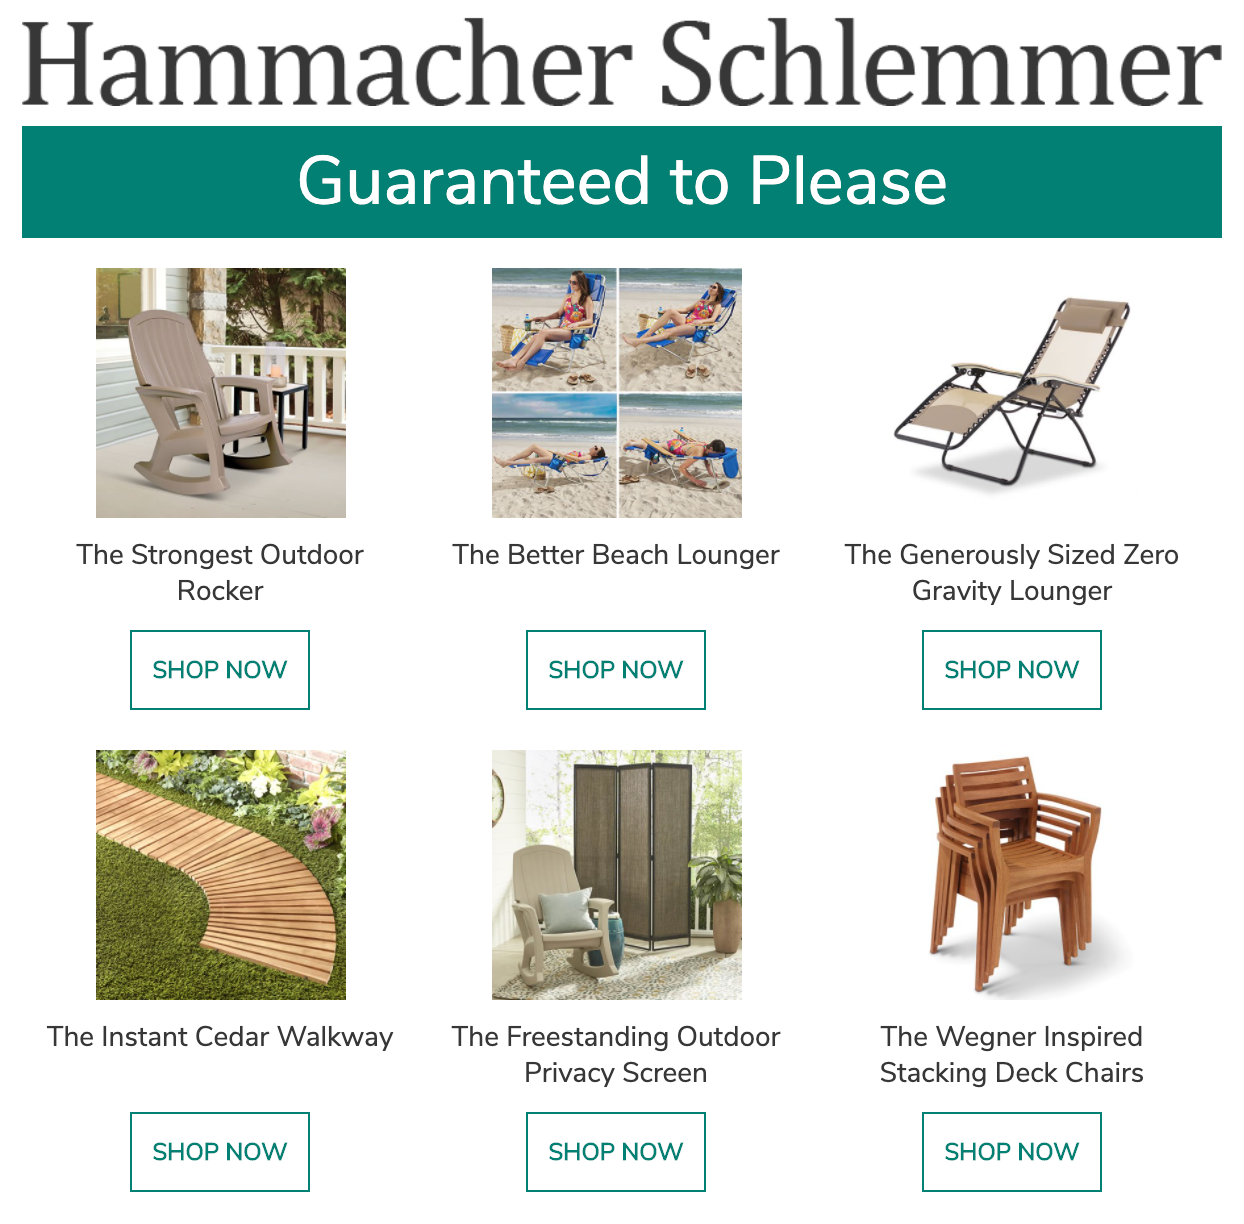 Hammacher-Schlemmer-Personalized-Product-Recommendations